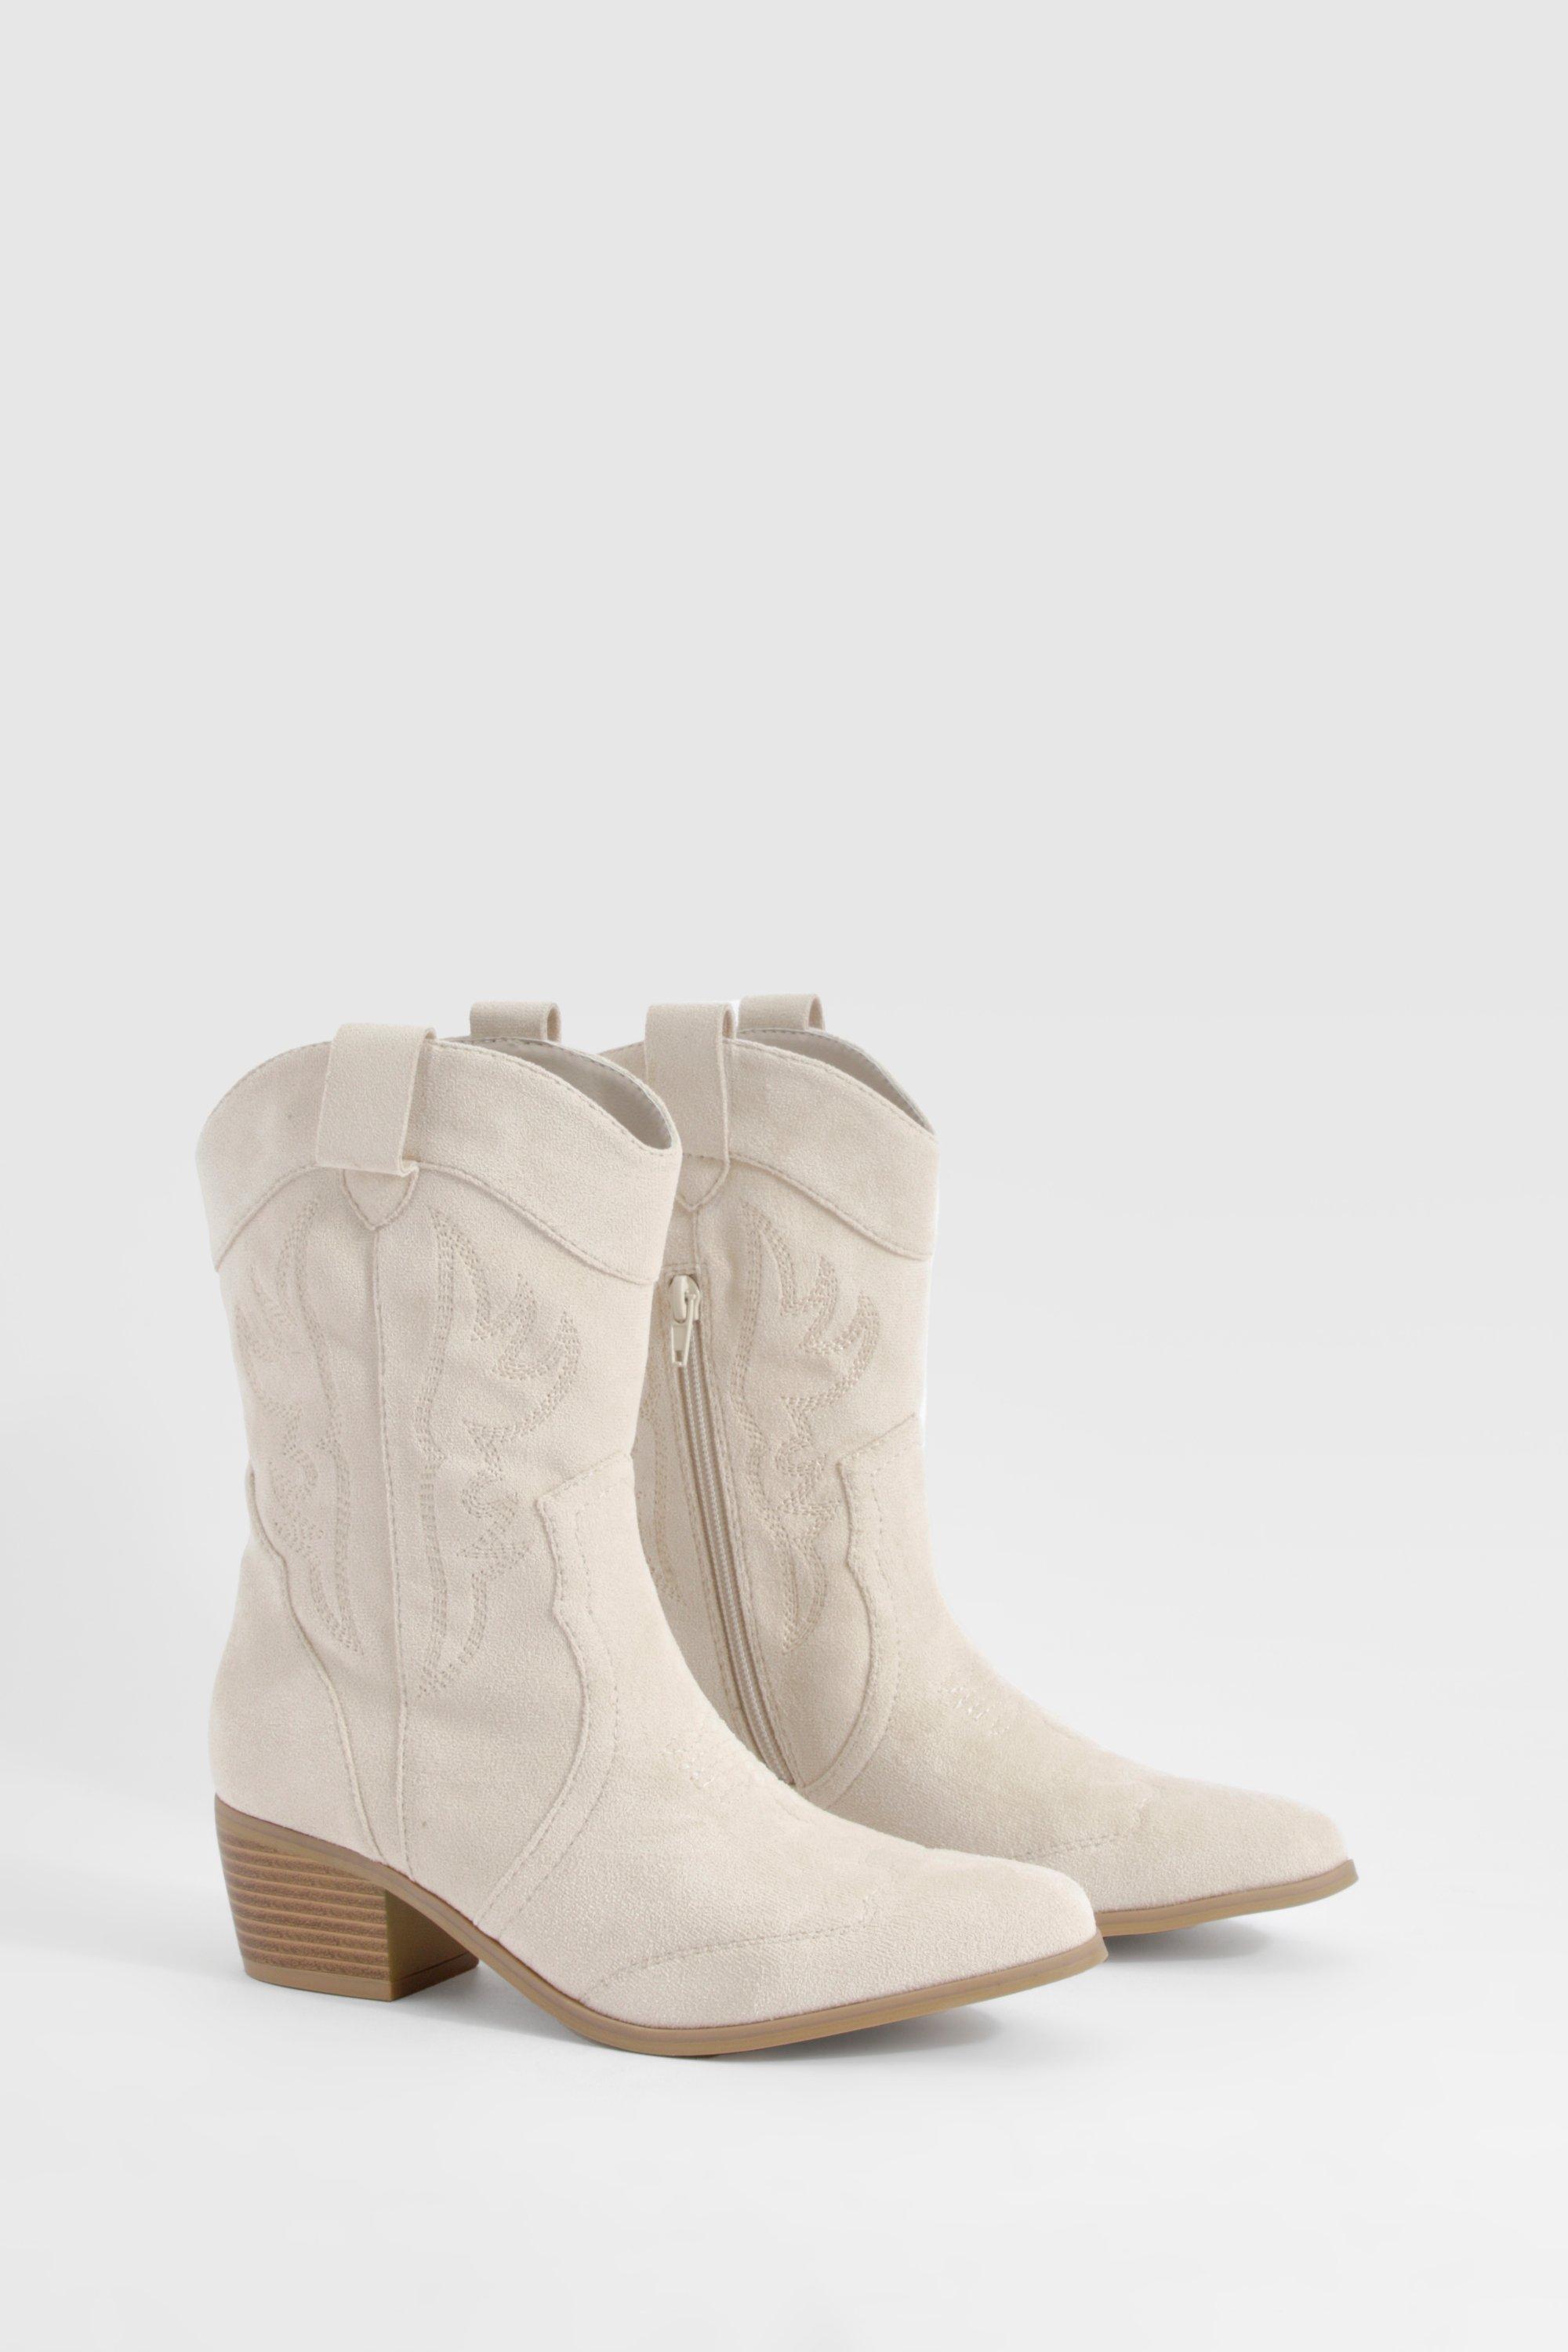 Boohoo Embroidered Western Ankle Cowboy Boots, Stone